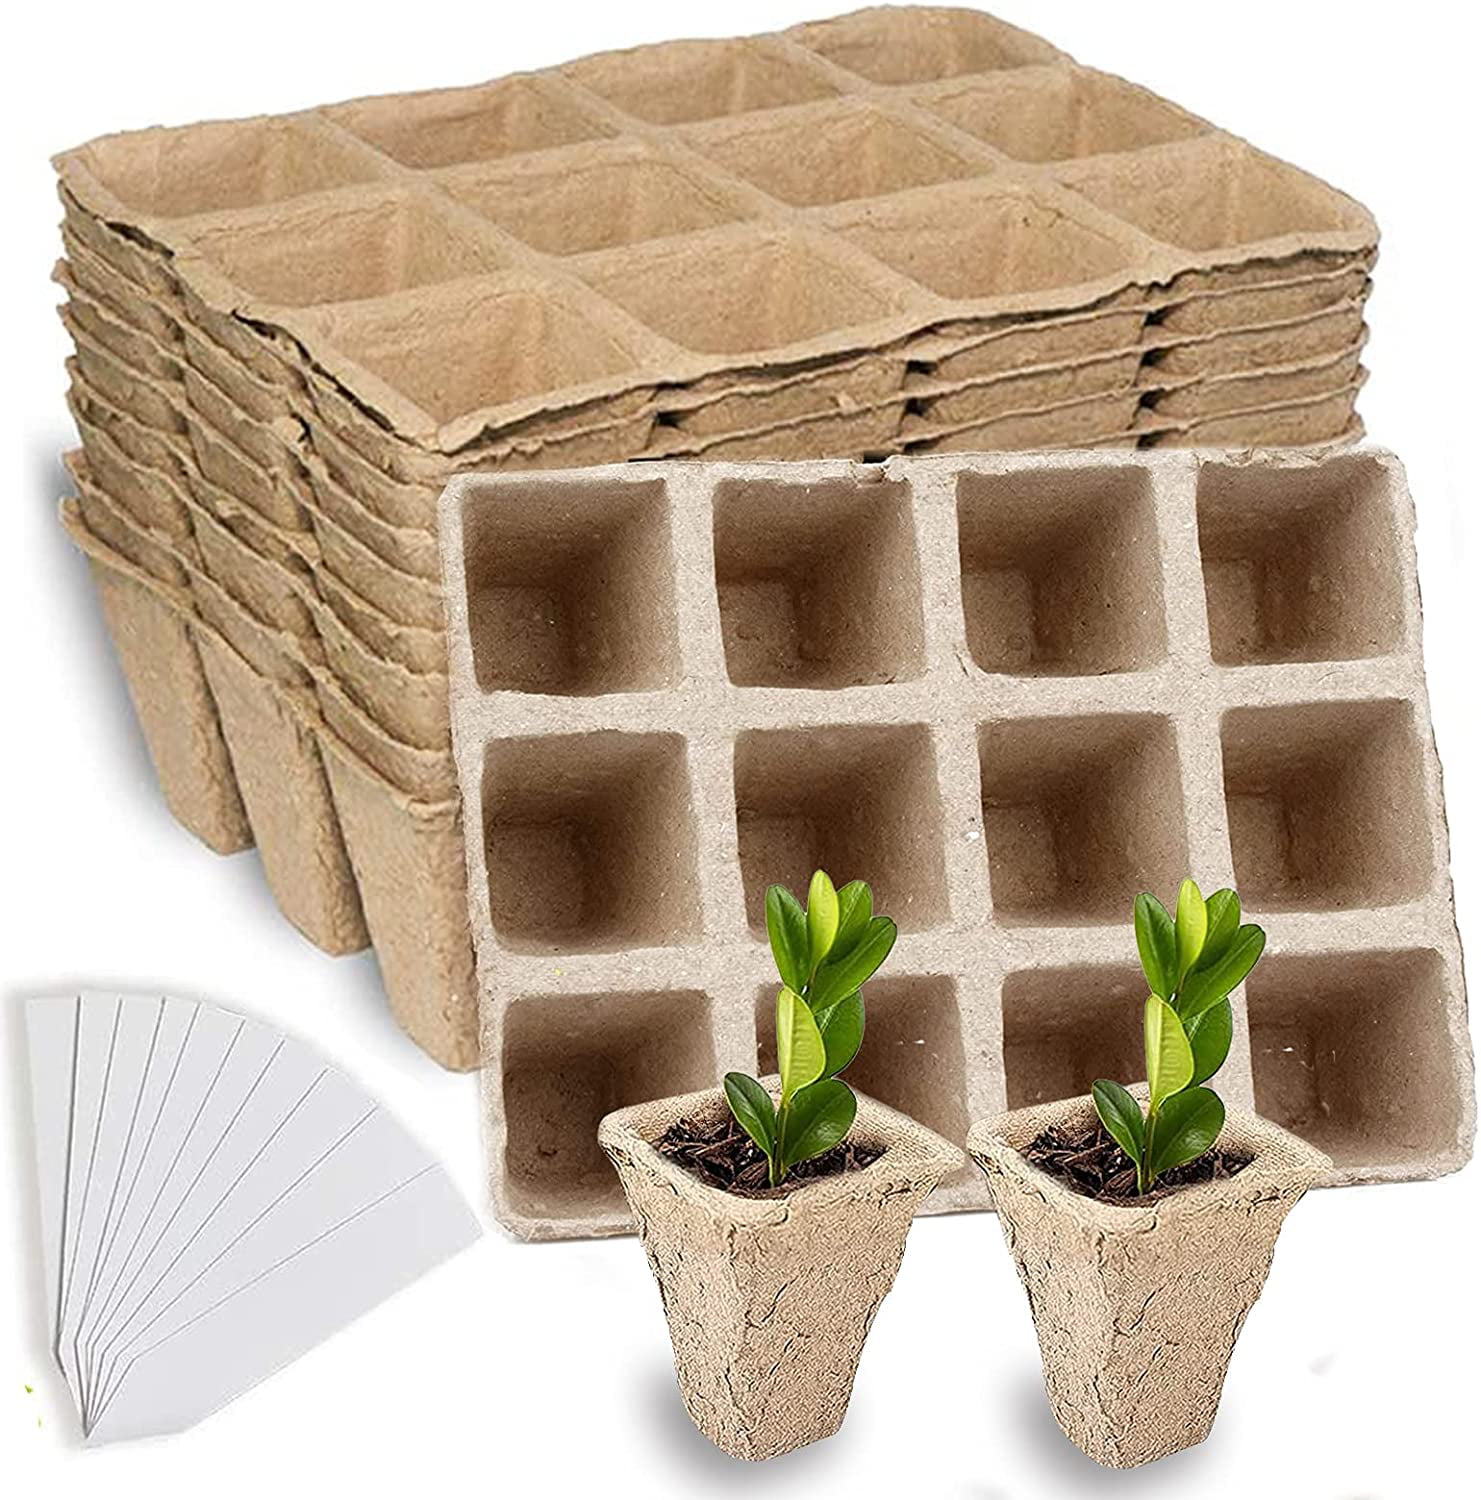 2 HYDROPONIC SEED TRAYS SEED STARTER TRAYS WITH MEDIUM 102 PLUGS EACH TRAY 